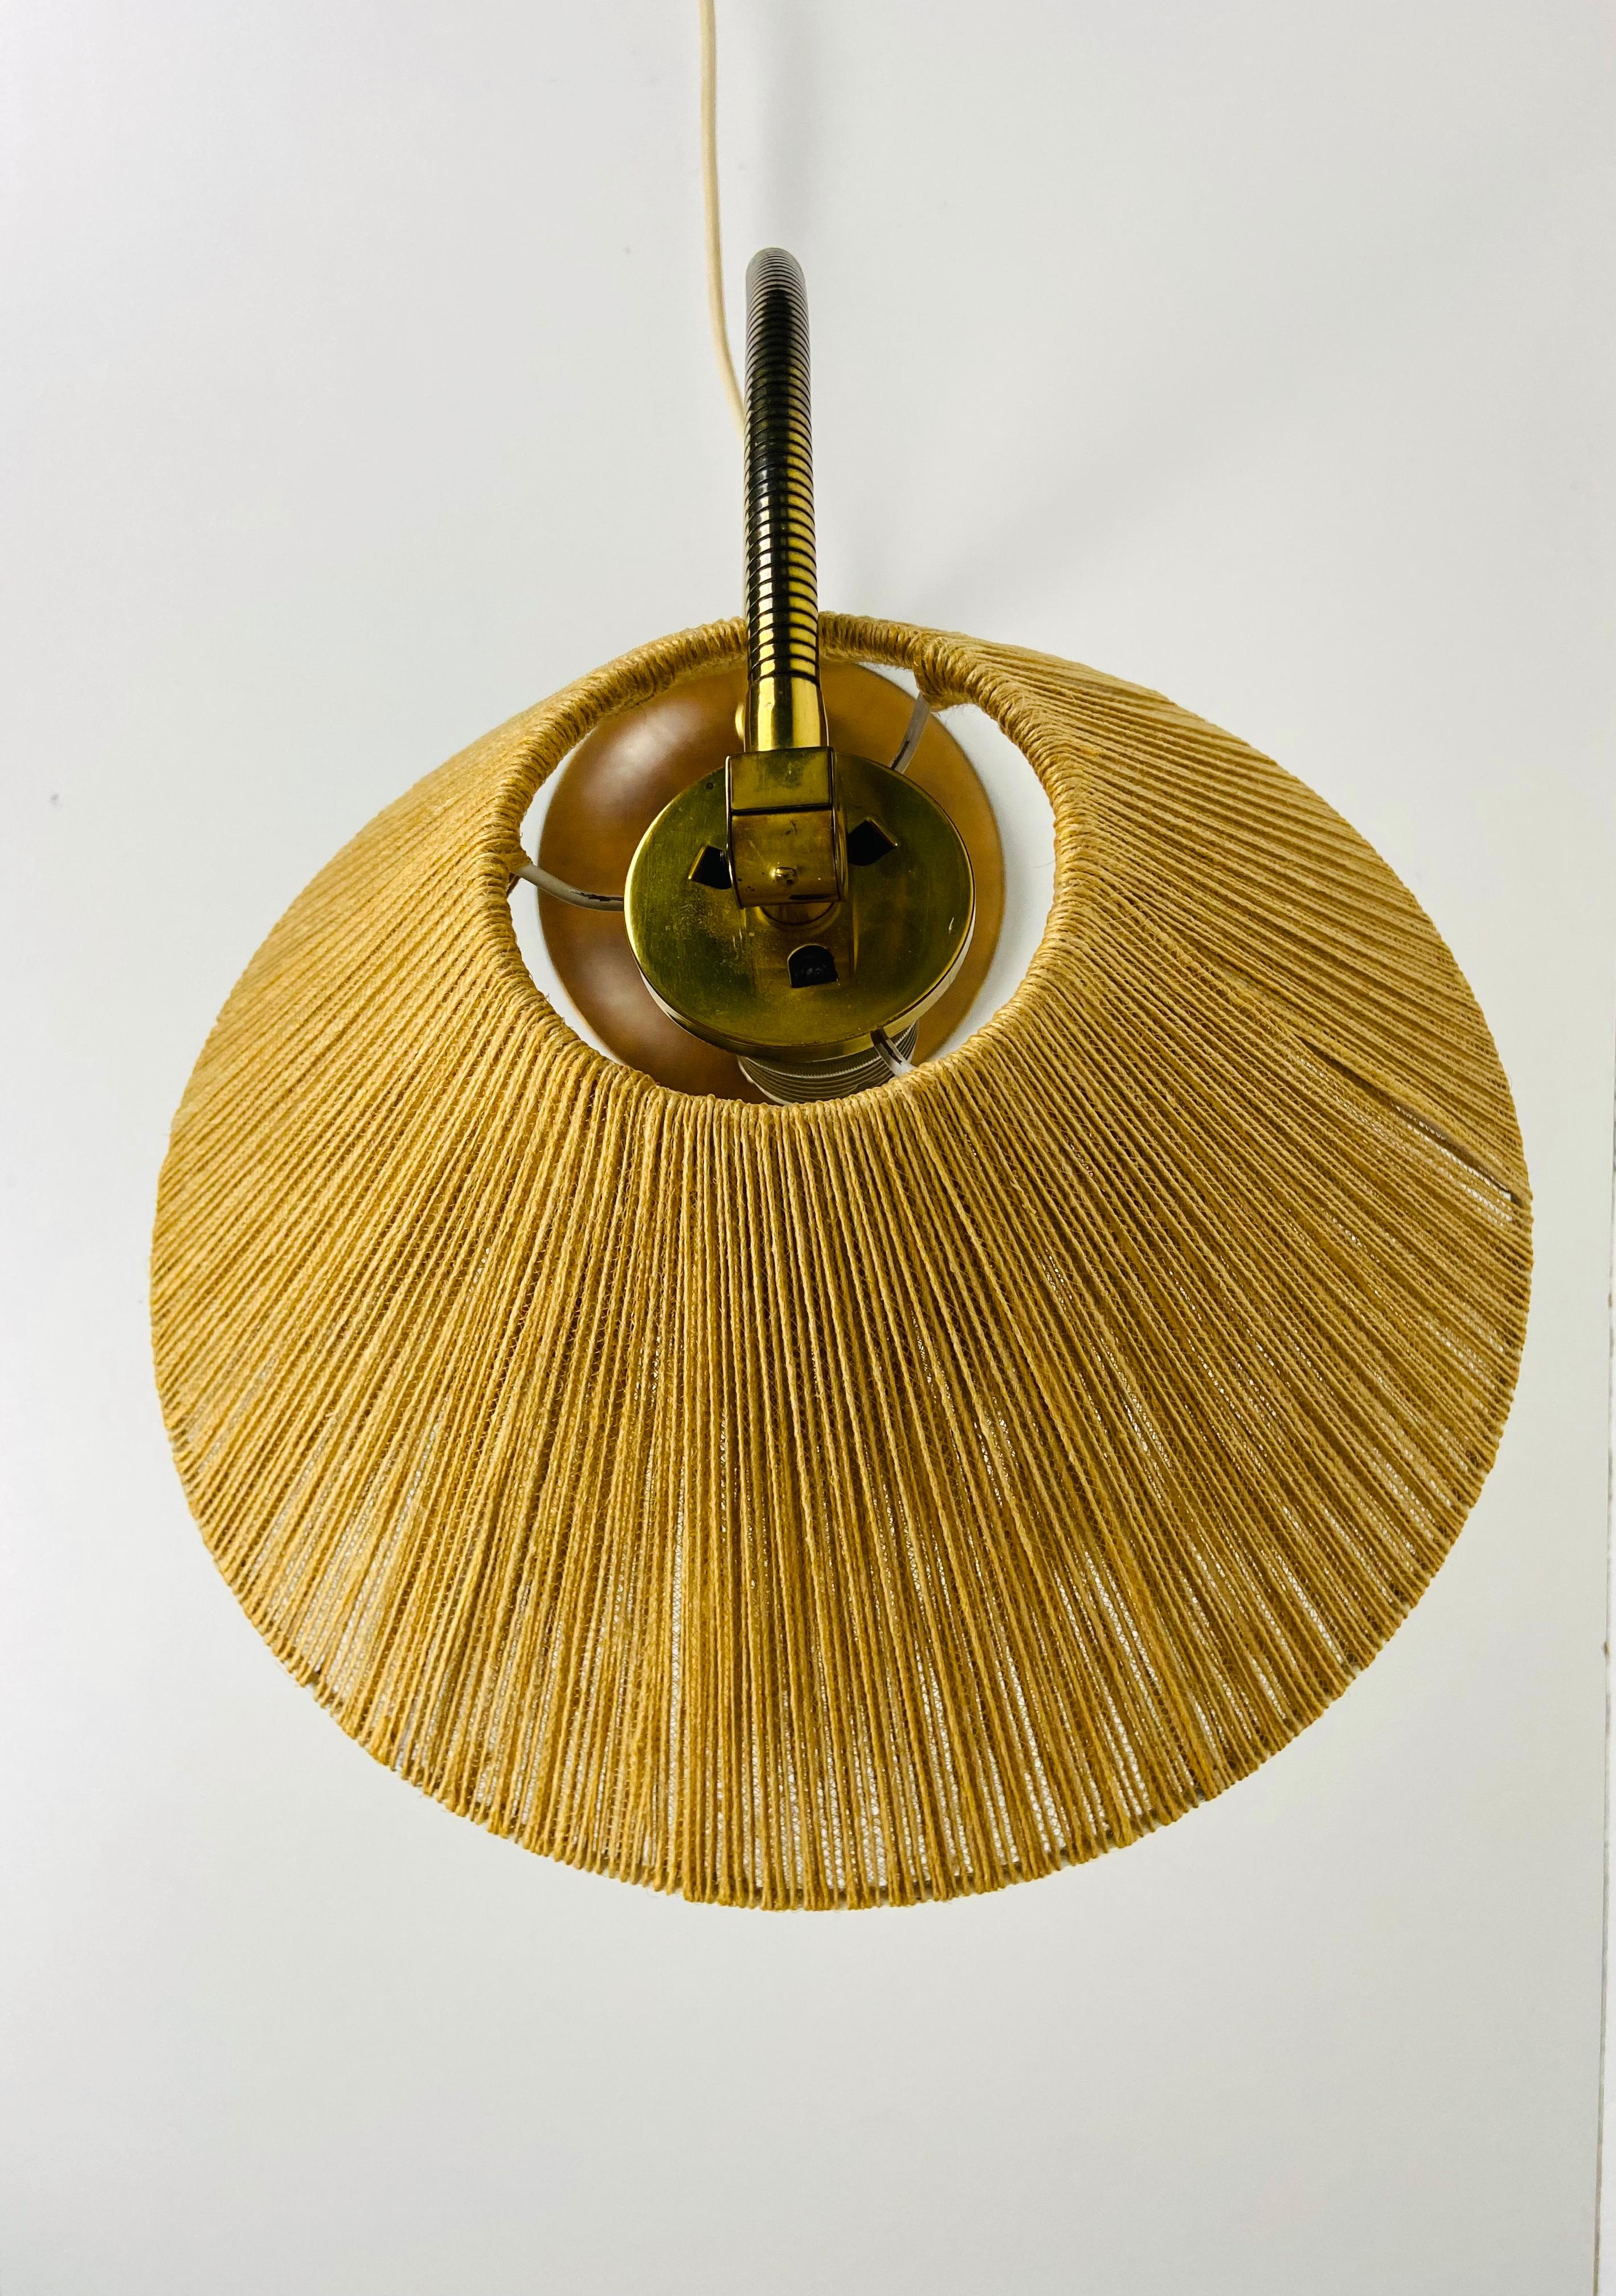 Midcentury Teak and Rattan Table Lamp by Temde, circa 1970 For Sale 6